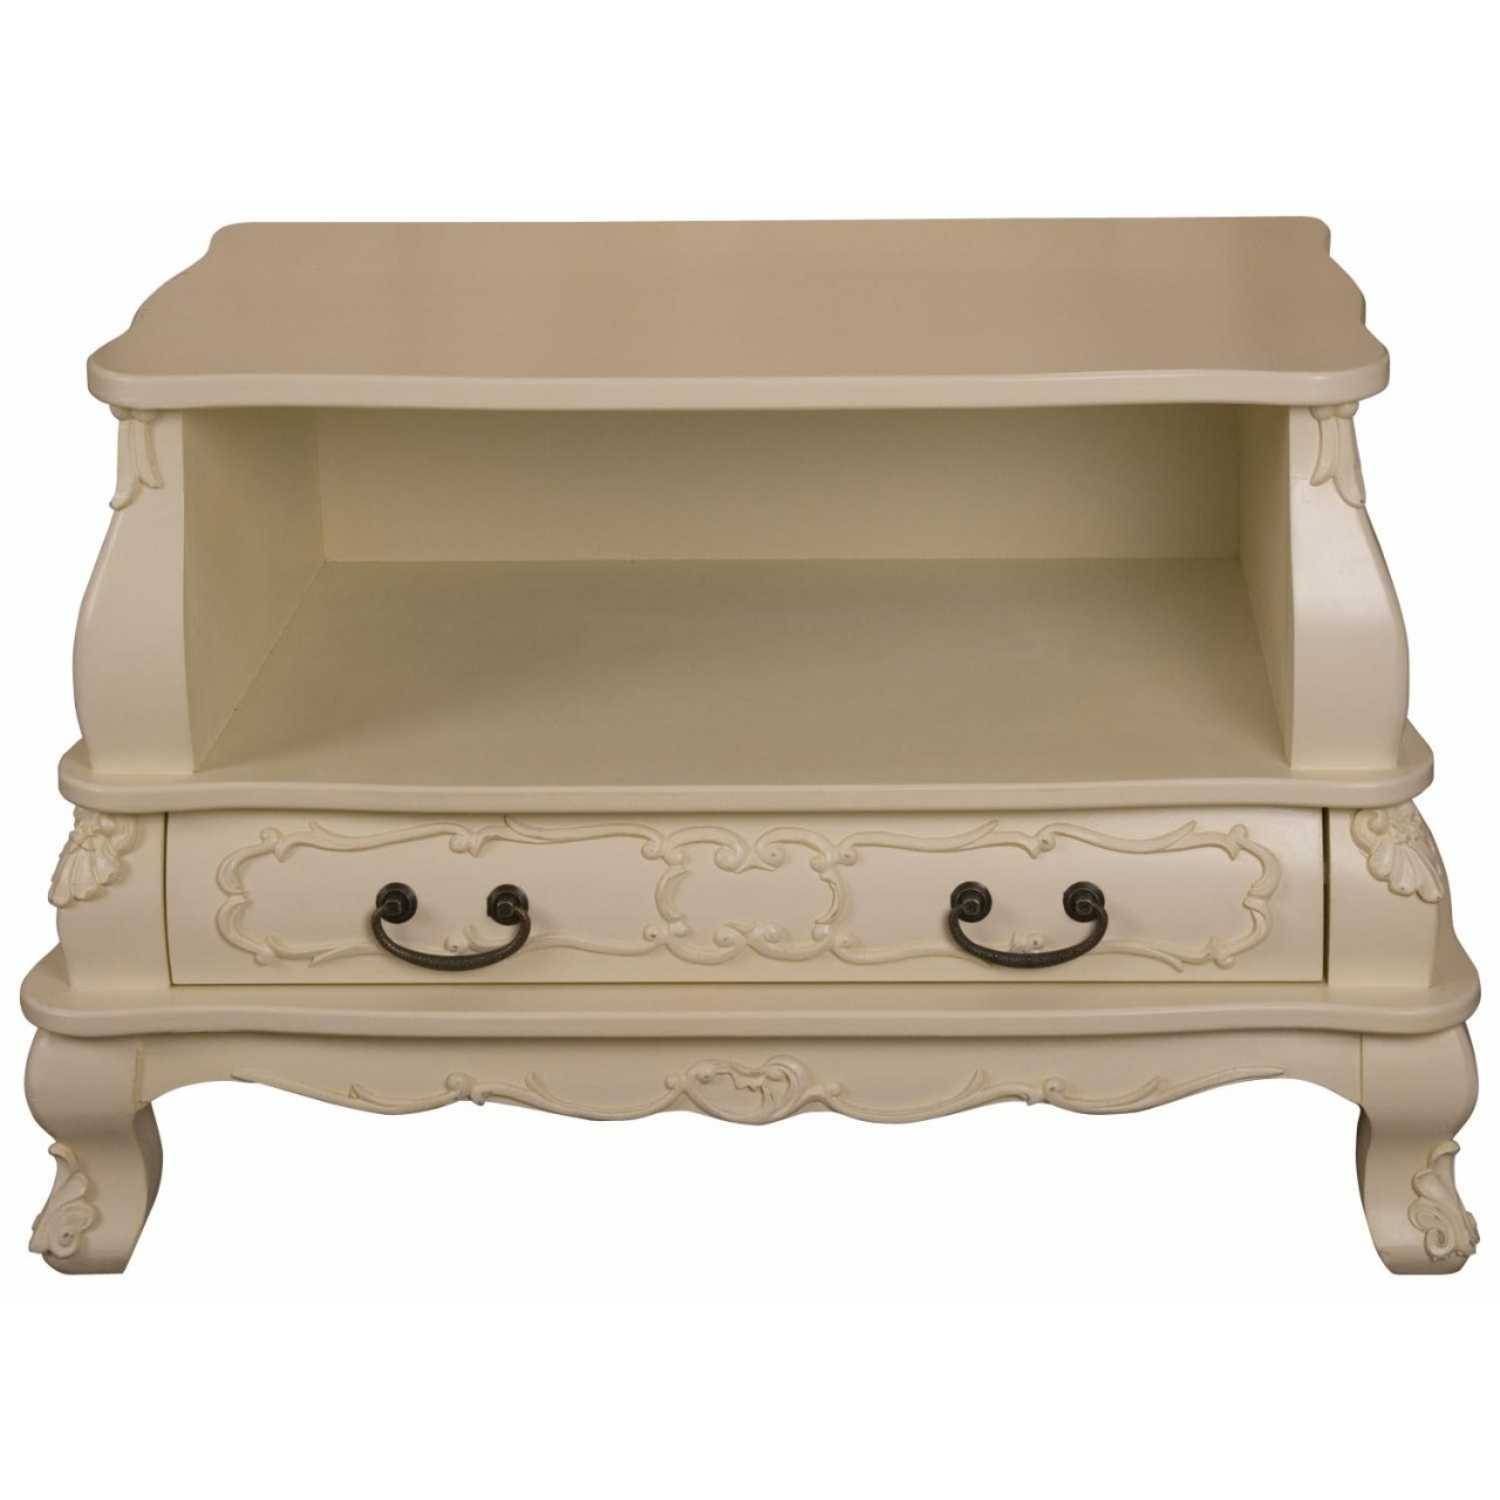 Cream Painted Shabby Chic Bergere Tv Cabinet For Shabby Chic Tv Cabinets (View 15 of 15)